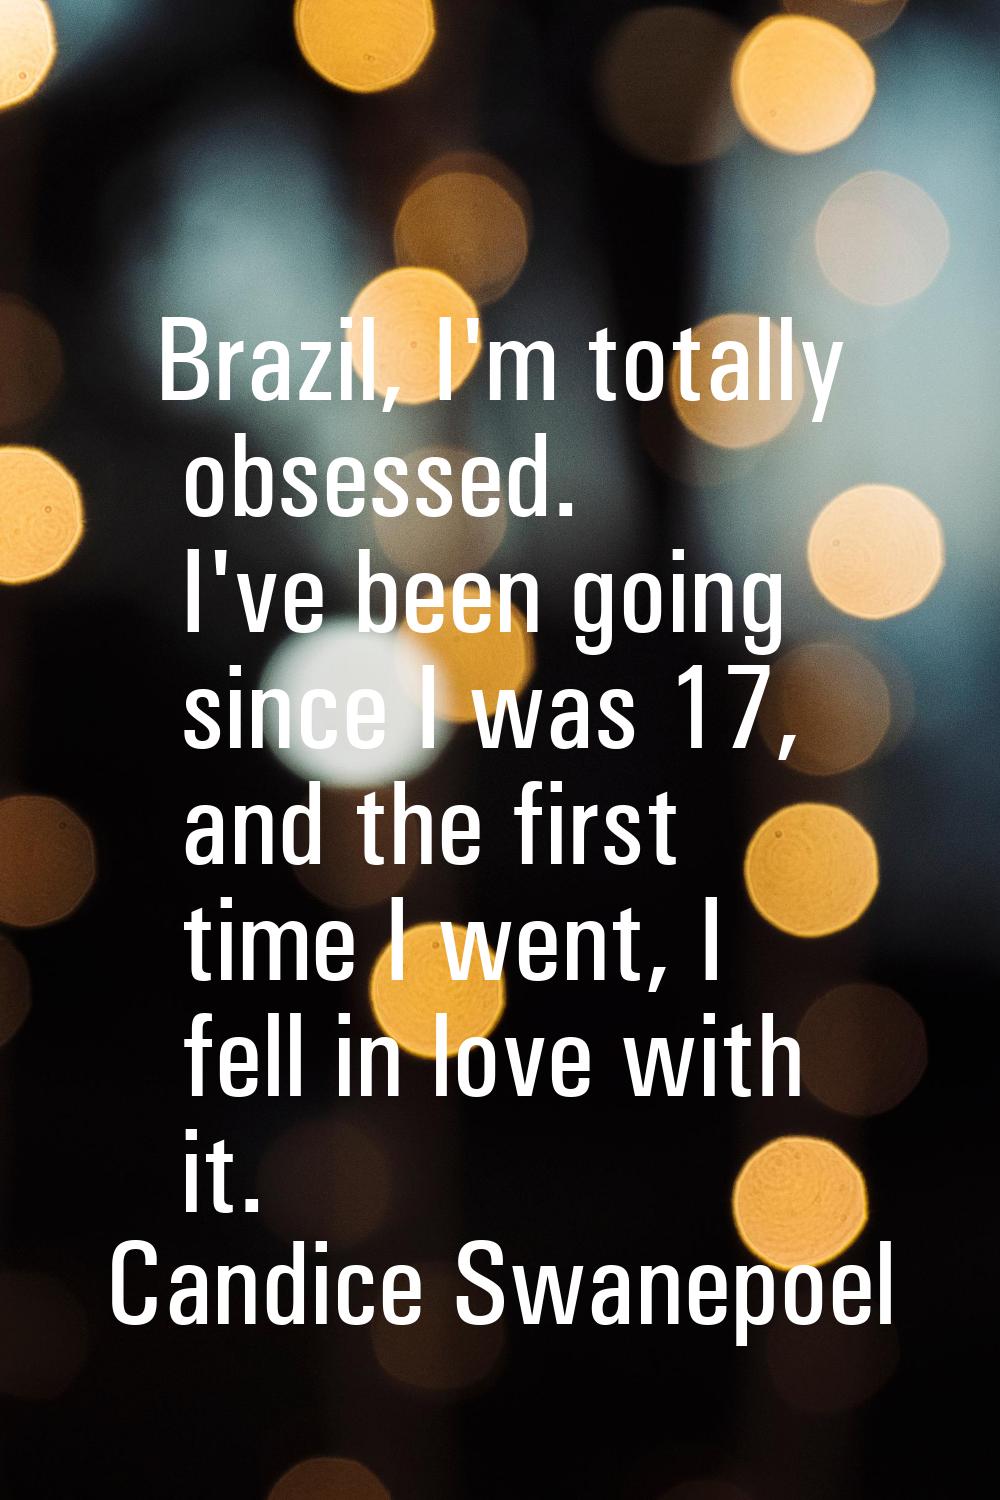 Brazil, I'm totally obsessed. I've been going since I was 17, and the first time I went, I fell in 